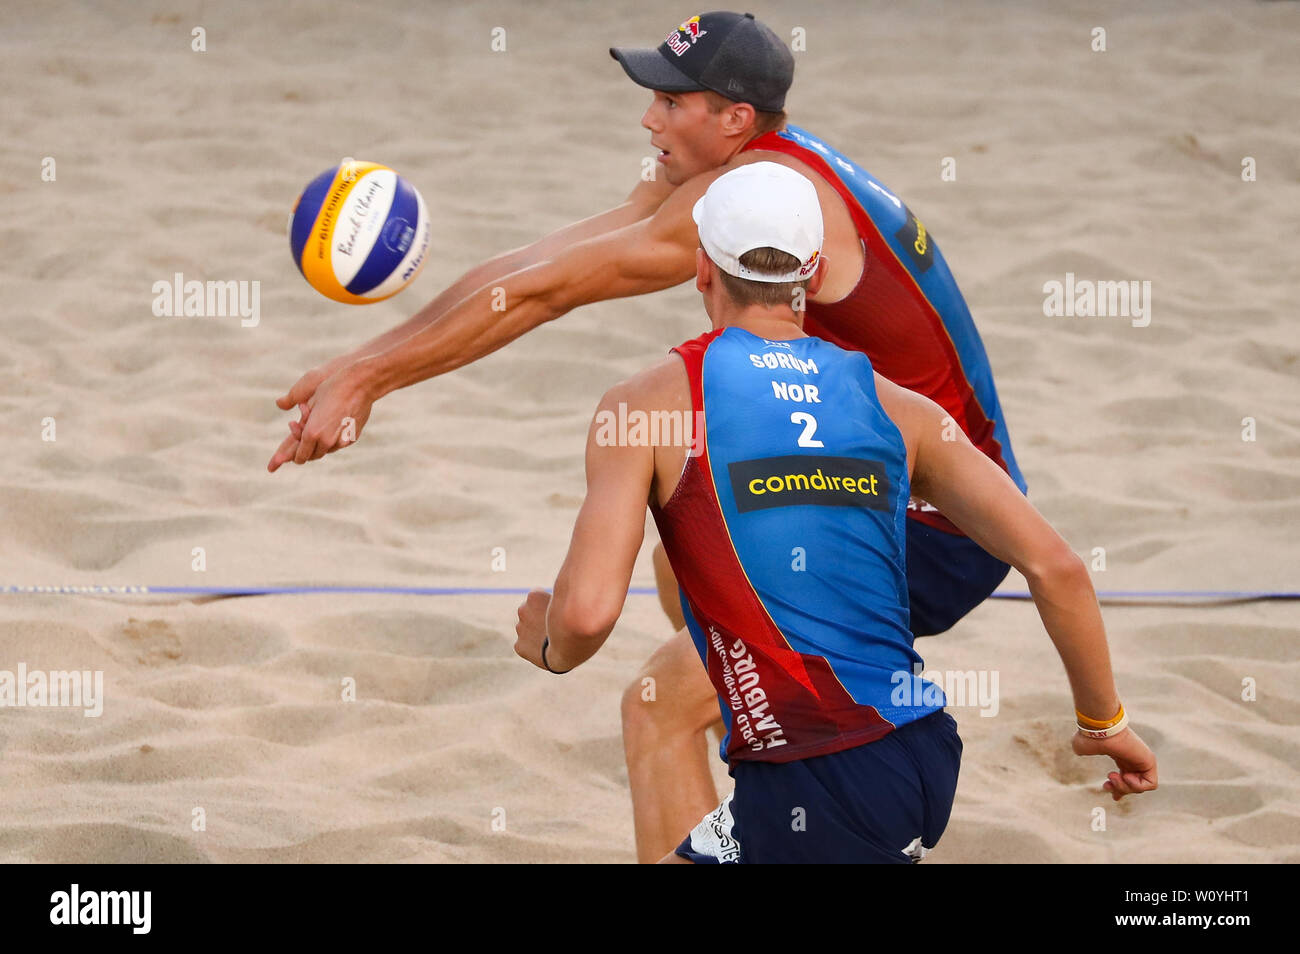 Hamburg, Germany. 28th June, 2019. Beach volleyball, World Cup, in the Rothenbaum Stadium: preliminary round men, Anders Berntsen Mol (l) and Christian Sandlie Sorum in action on the Center Court. Credit: Christian Charisius/dpa/Alamy Live News Stock Photo